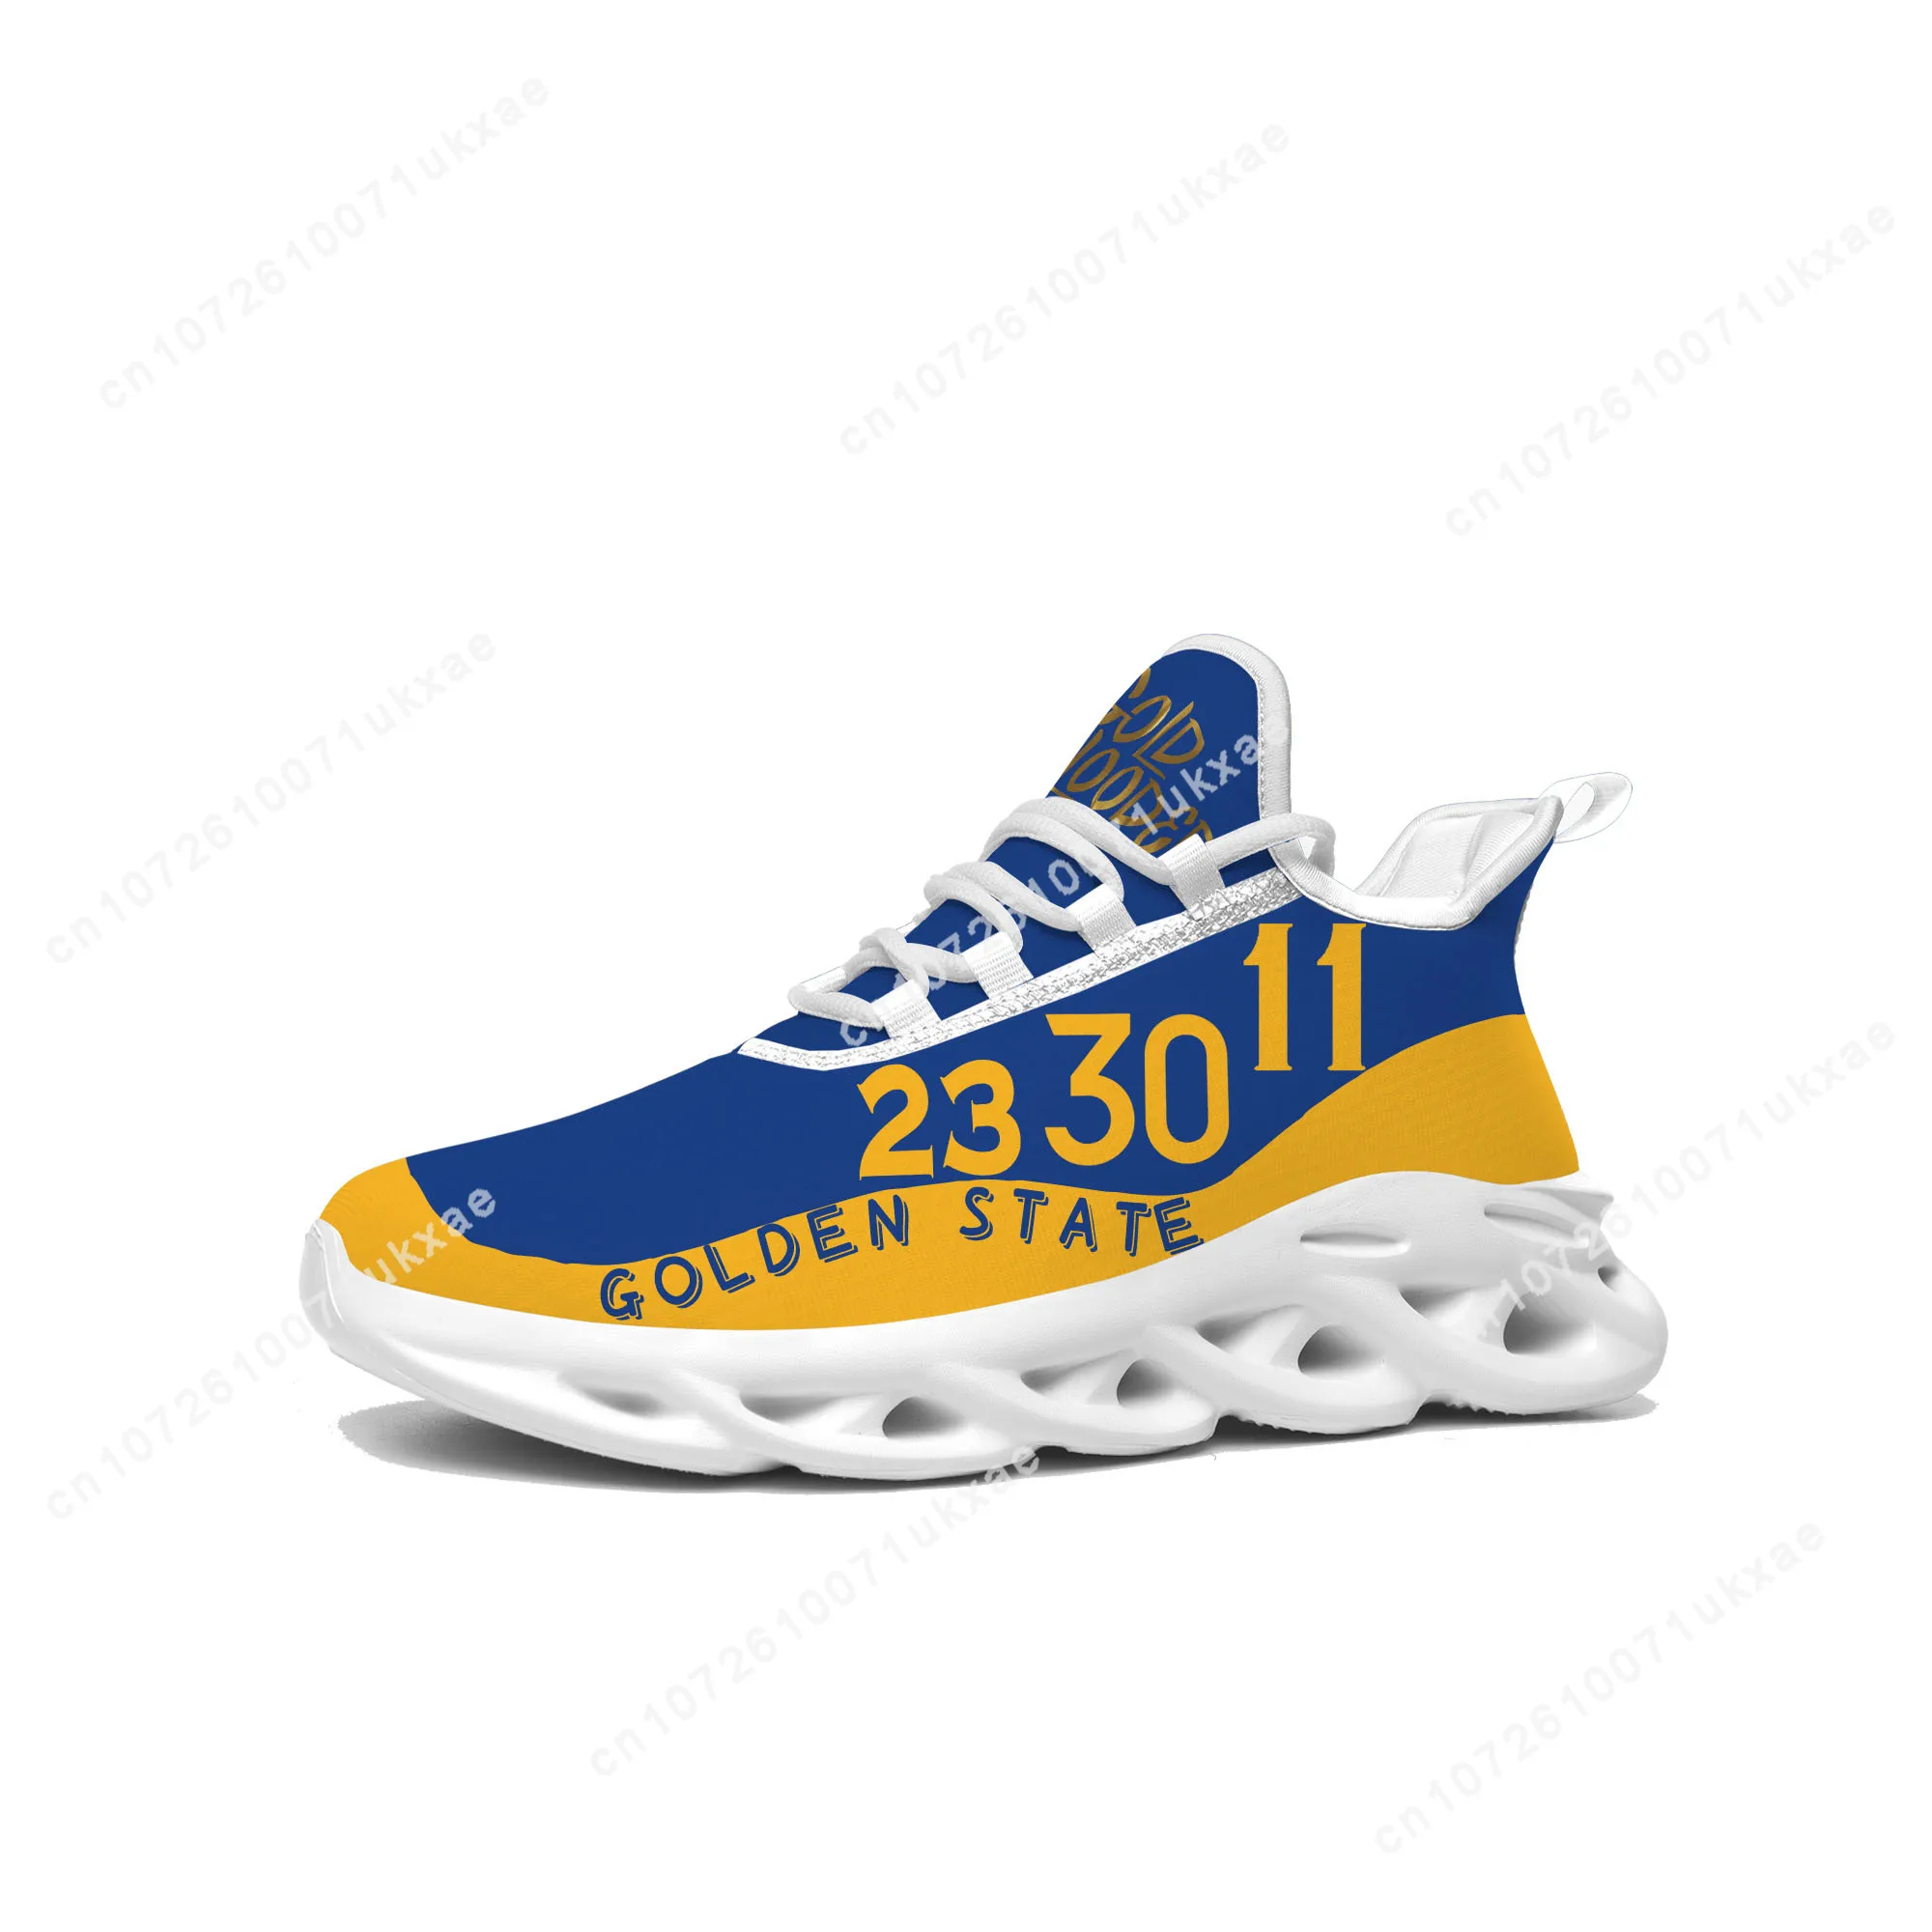 

golden state Number 30 11 23 Gold Blooded Flats Sneakers Mens Womens Sports Running Shoes DIY Sneaker customization Shoe